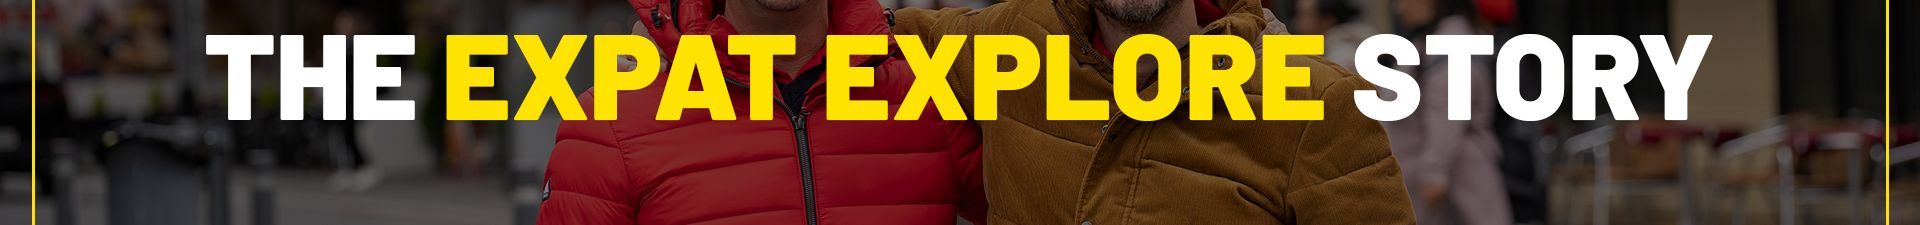 the-expat-explore-story-banner